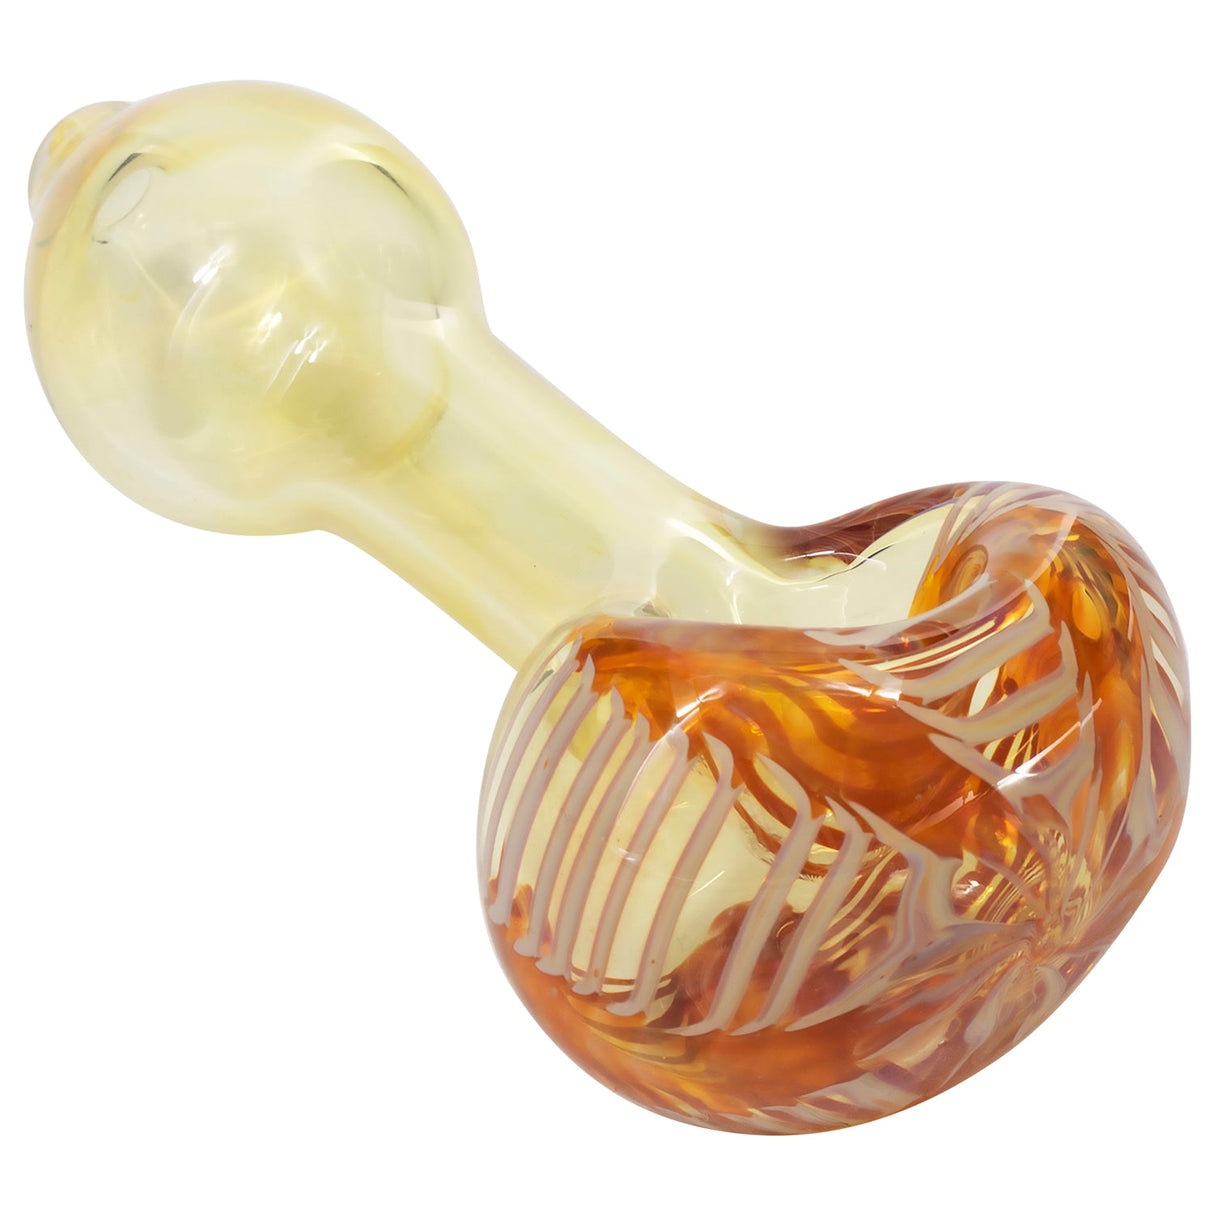 LA Pipes Color Cake Swirl Glass Pipe for Dry Herbs, Spoon Design, 3.5" Length, Top View